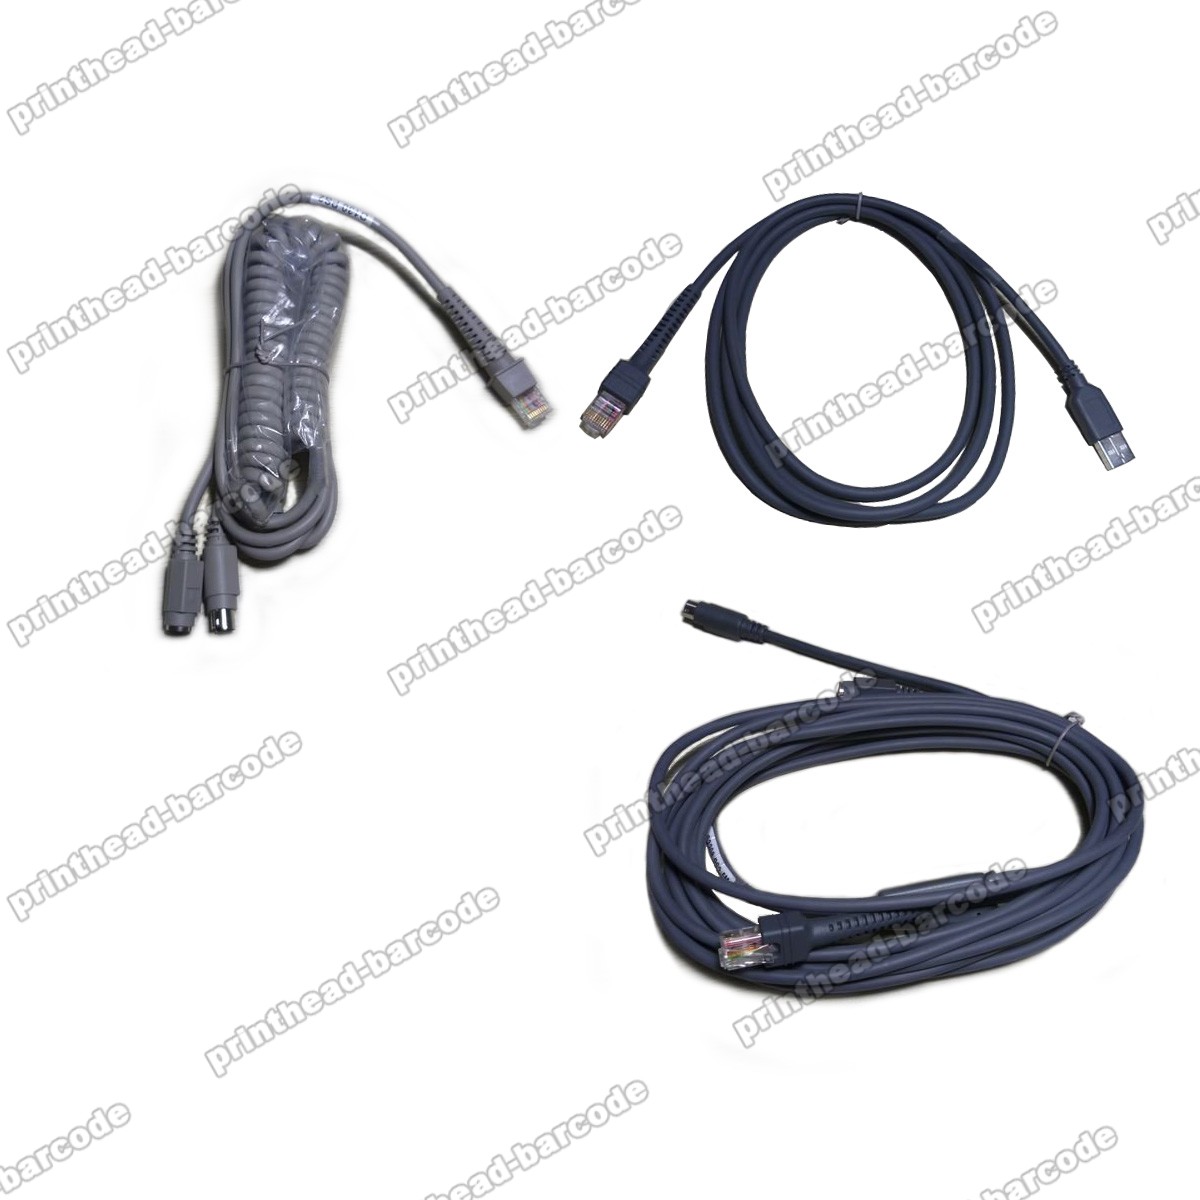 USB Cable 2M for Honeywell 1900GSR-2-COL